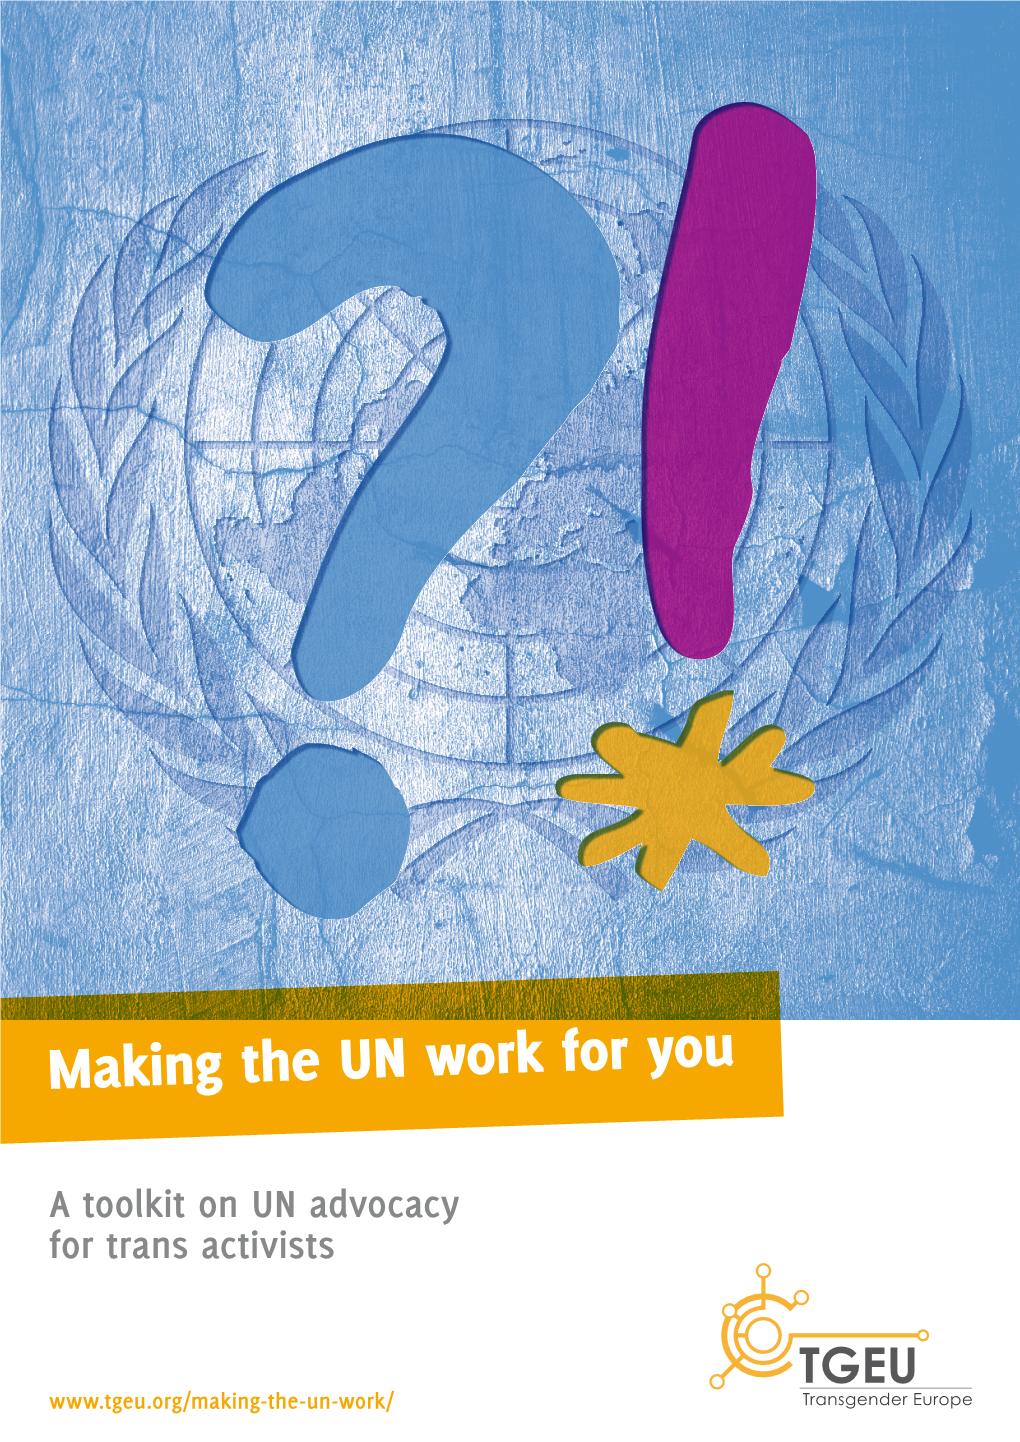 A Toolkit on UN Advocacy for Trans Activists